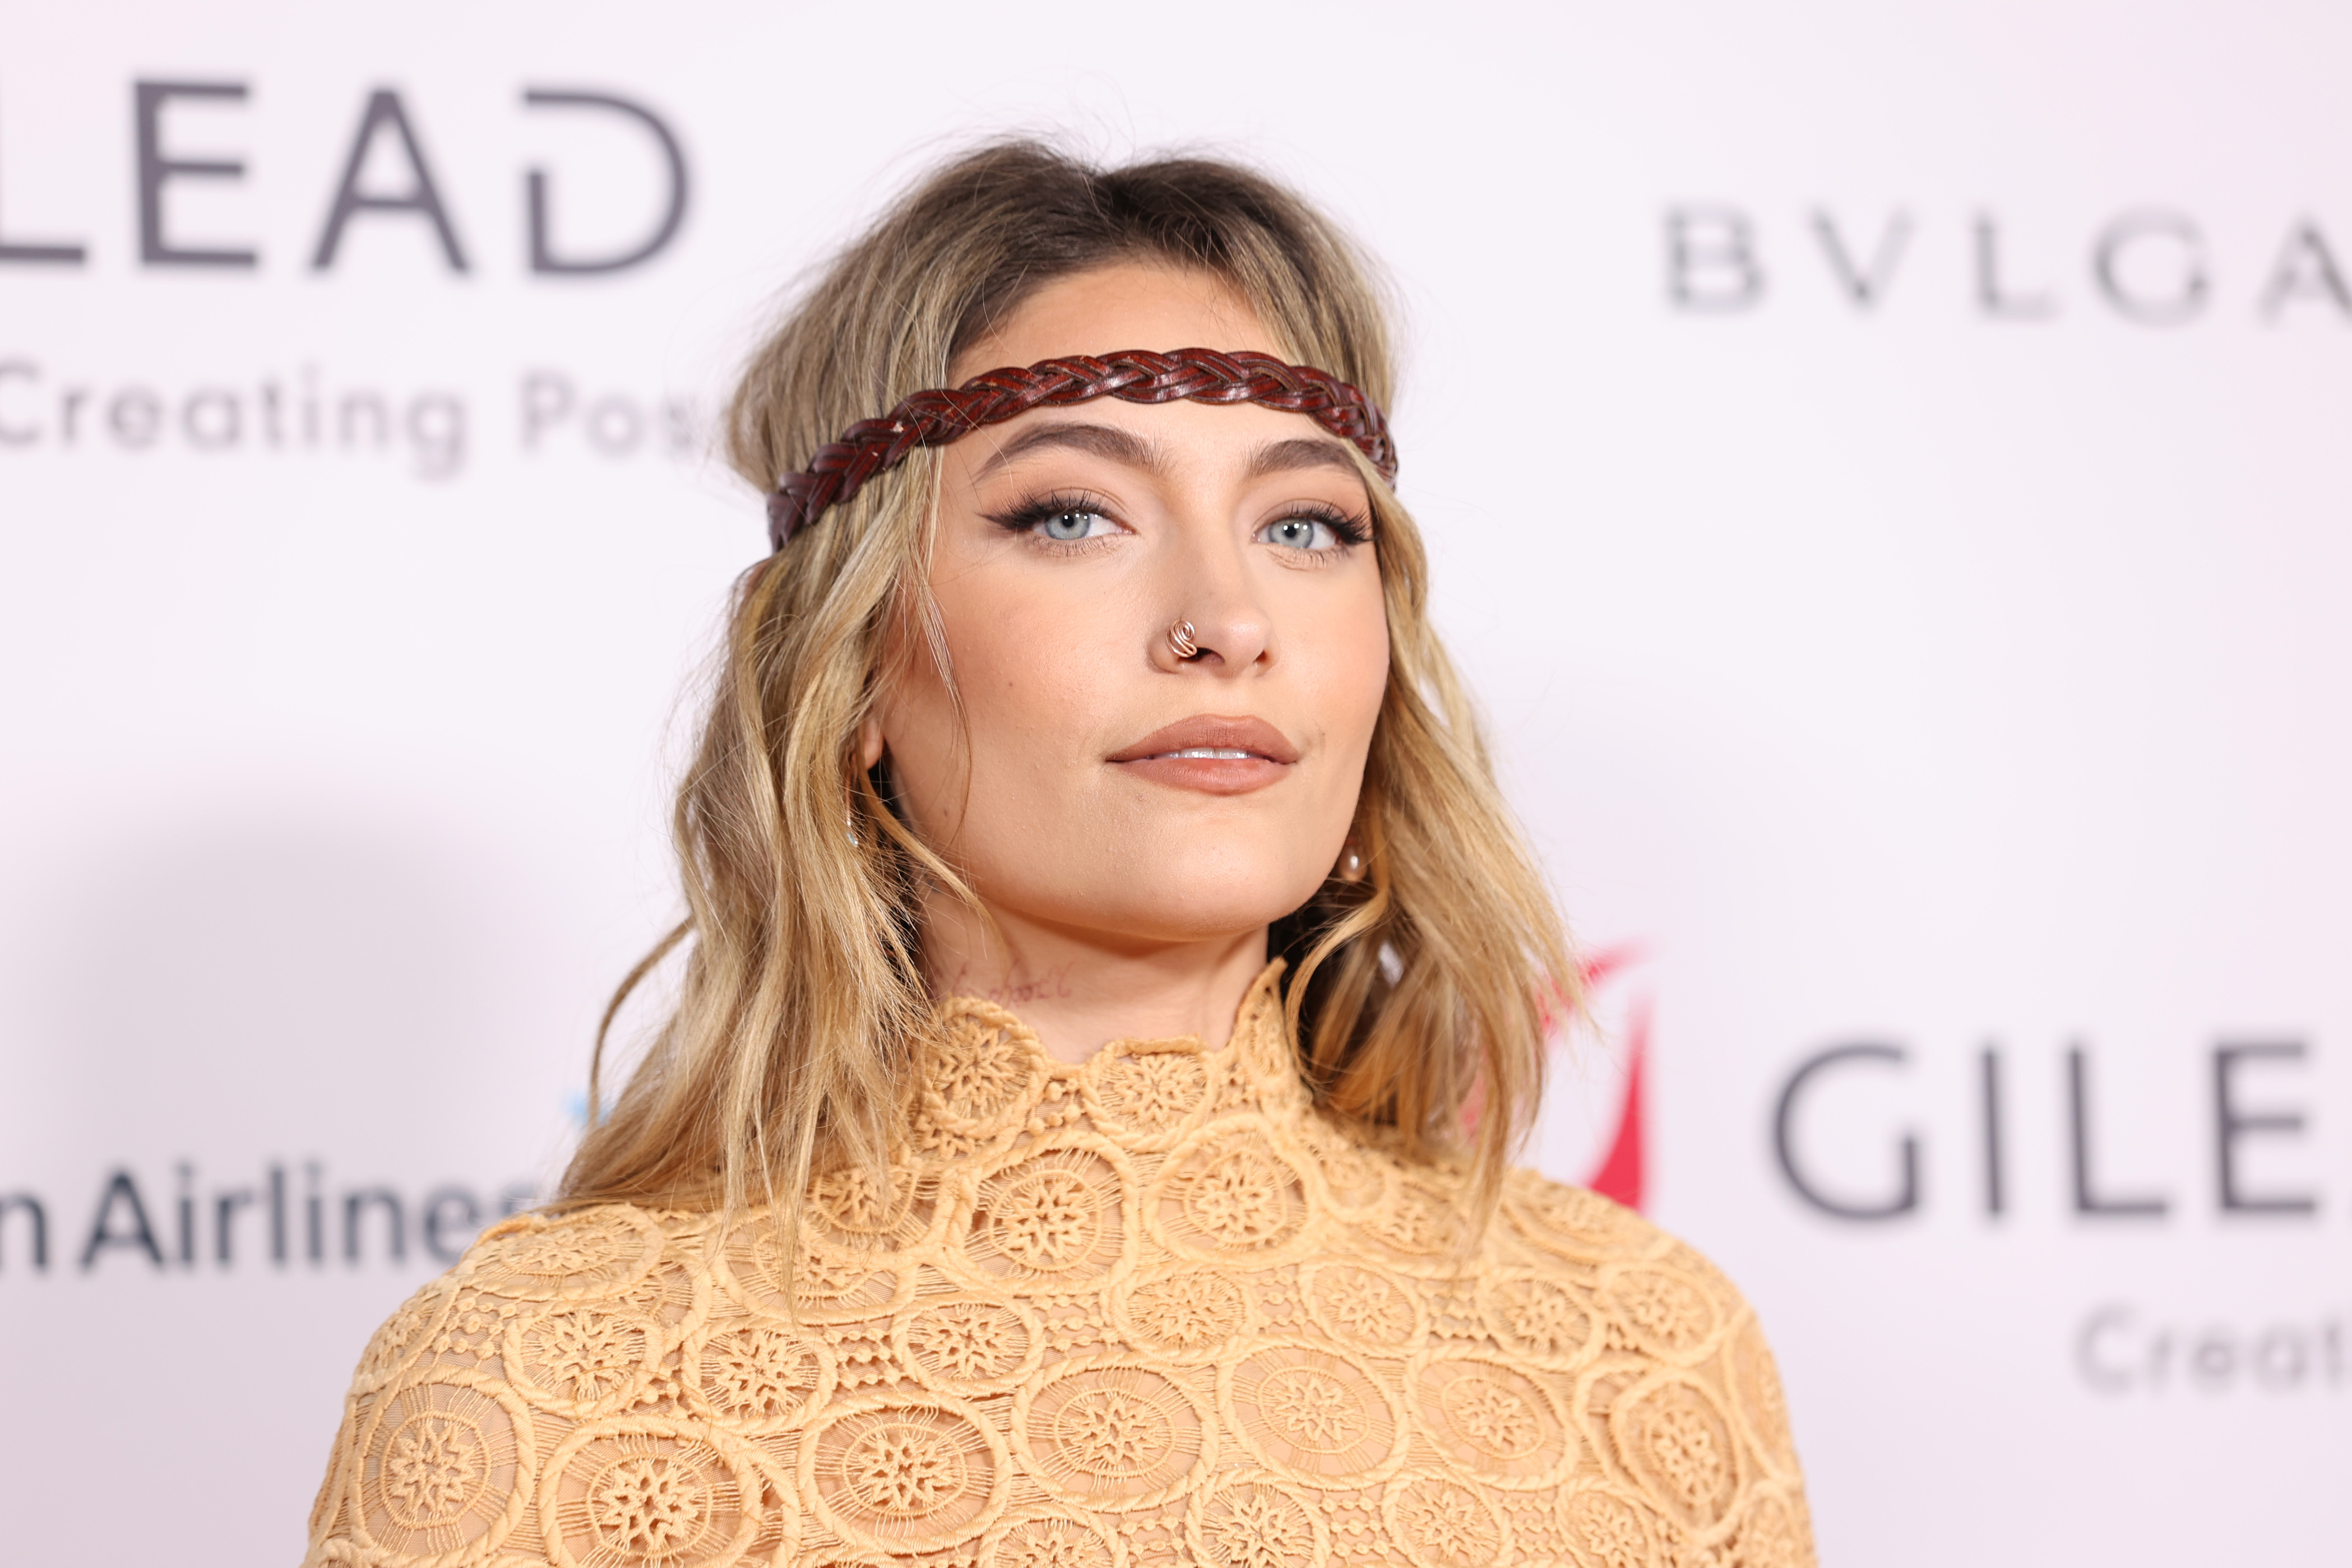 Paris Jackson at The Elizabeth Taylor Ball to End AIDS in West Hollywood, California on September 17, 2021 | Source: Getty Images